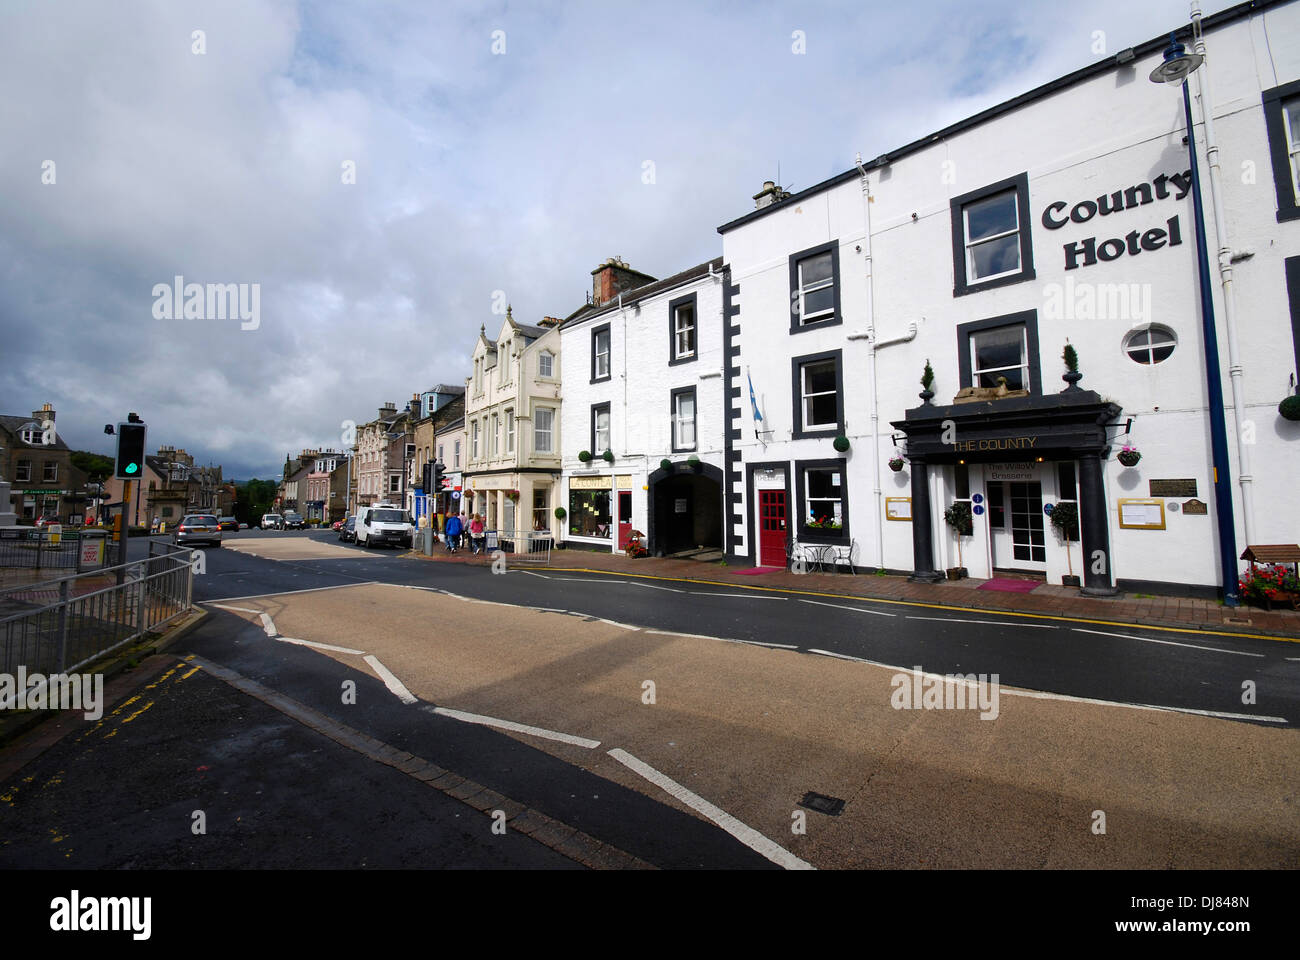 A street scene of High street, adjacent to the market square of Selkirk, Scottish Borders UK Stock Photo